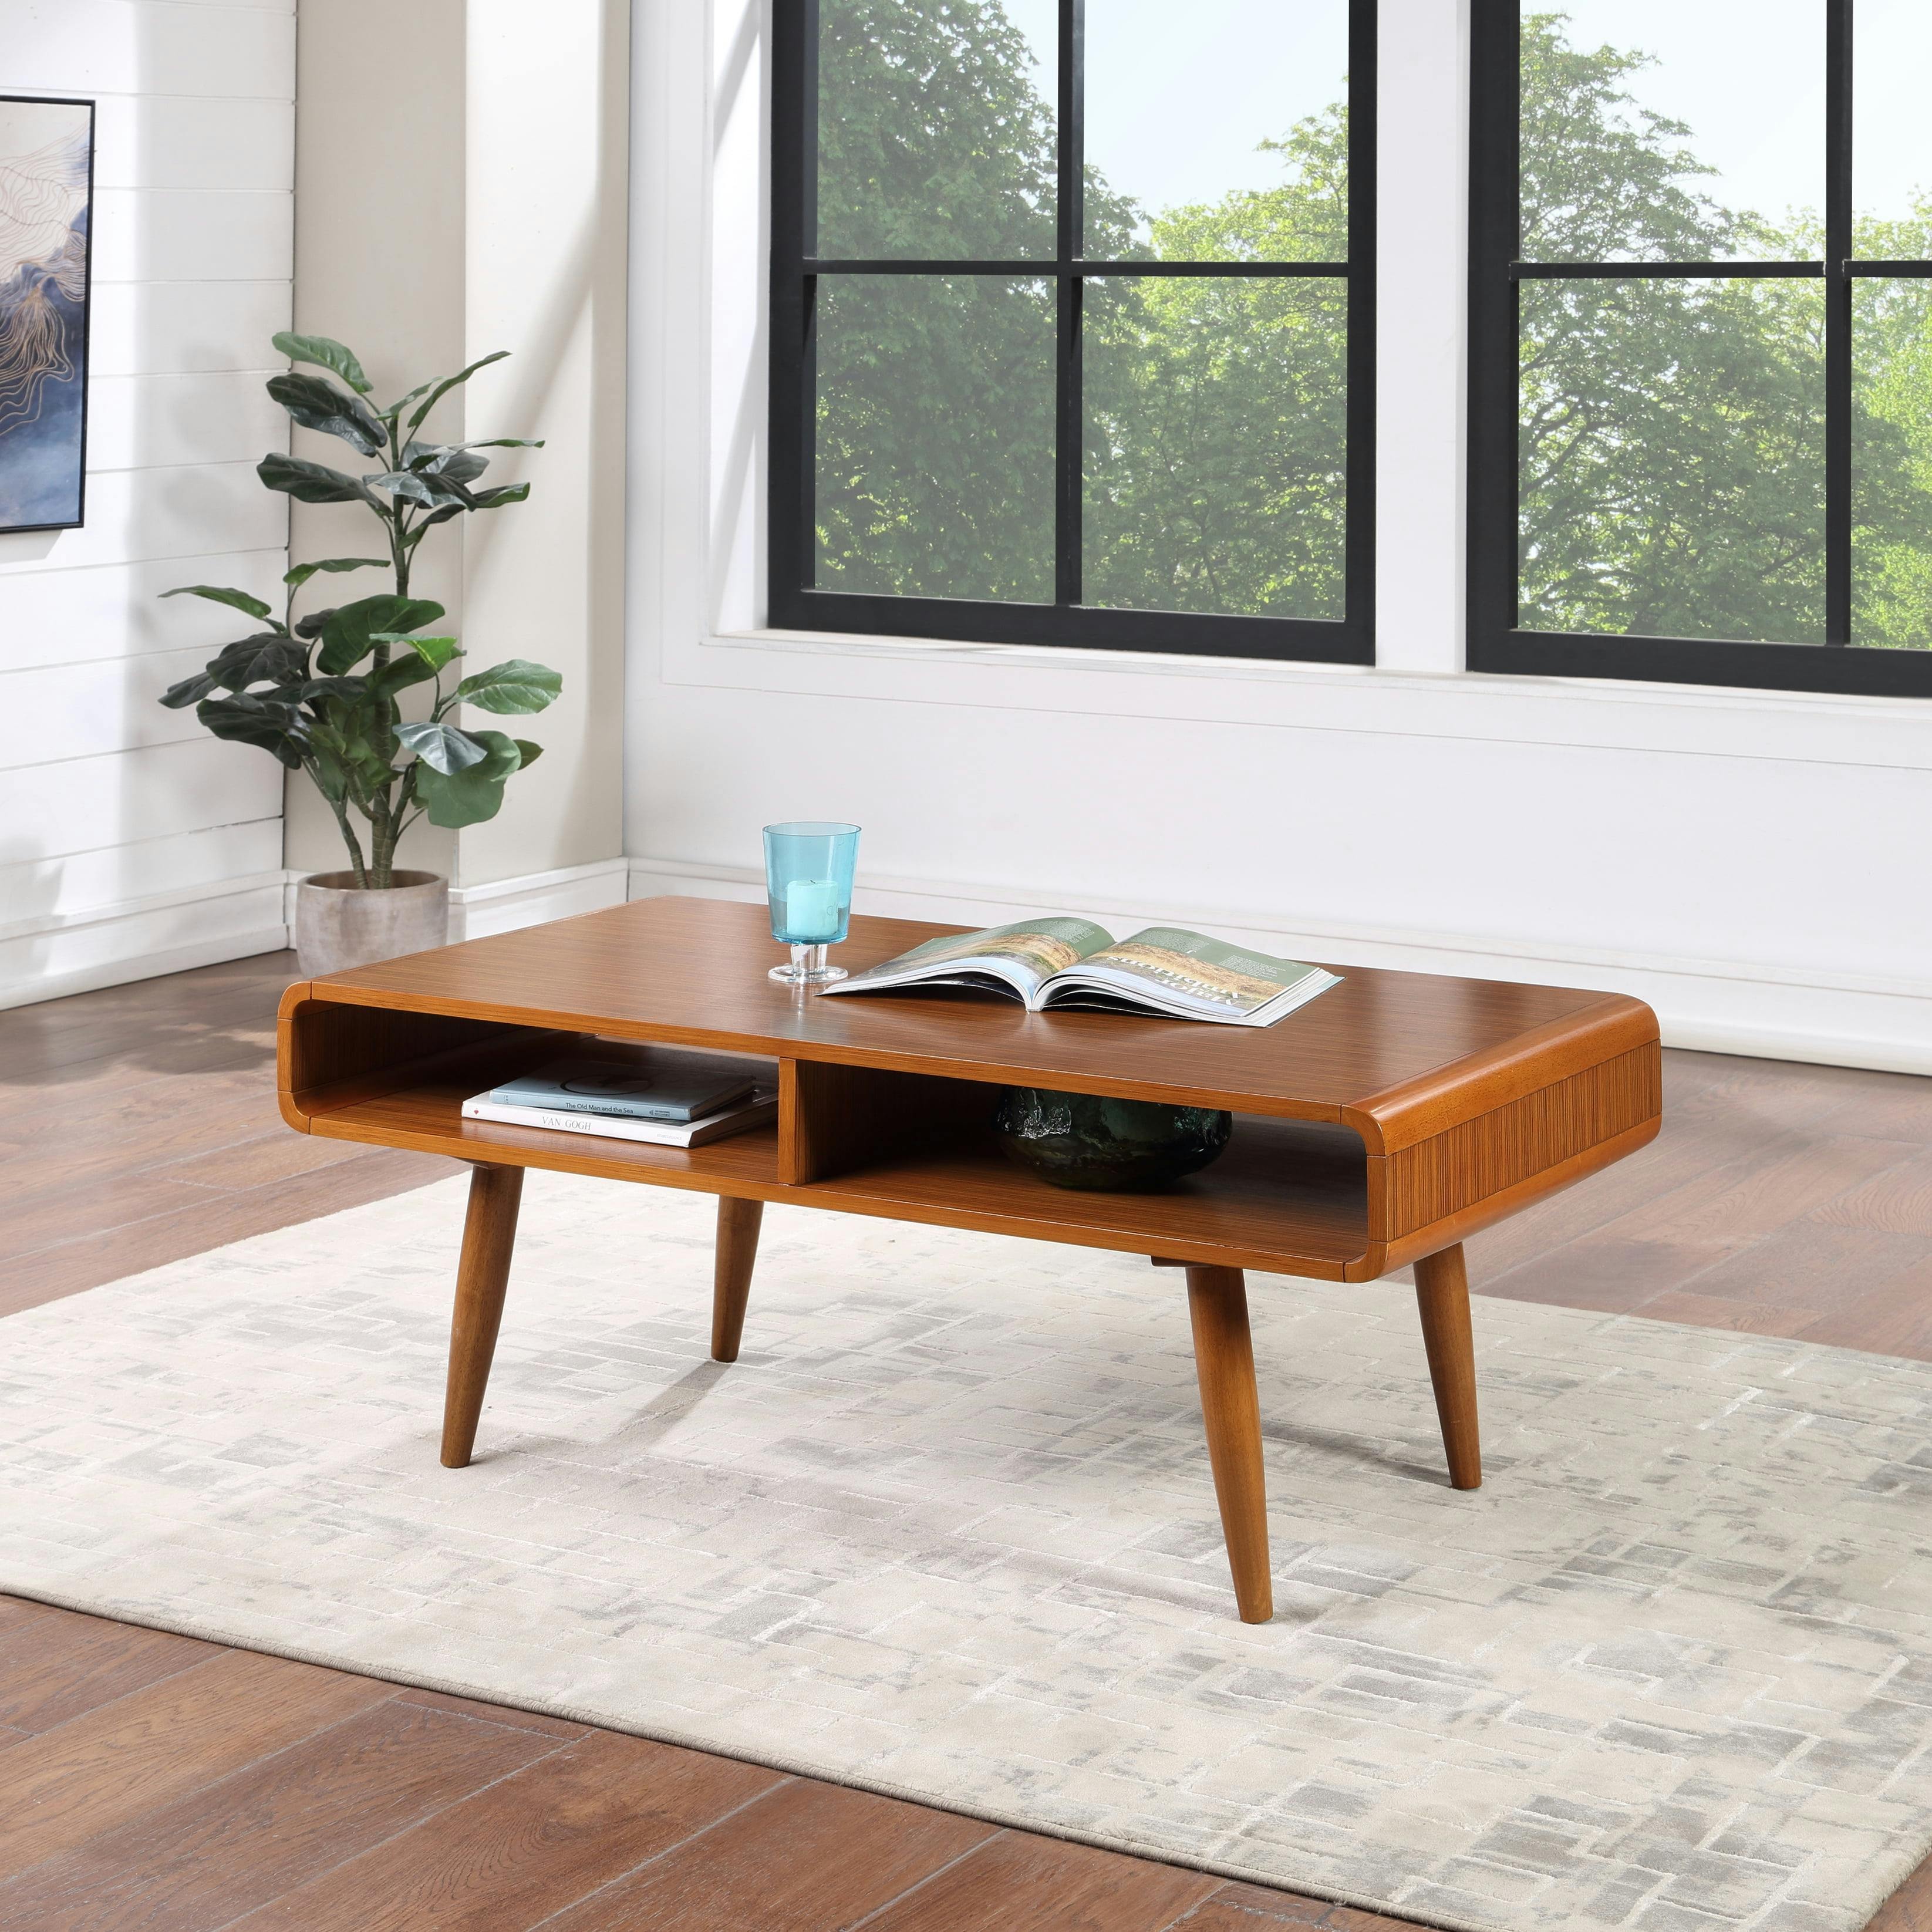 Zambrano Wood Round Chic Coffee Table with Open Storage